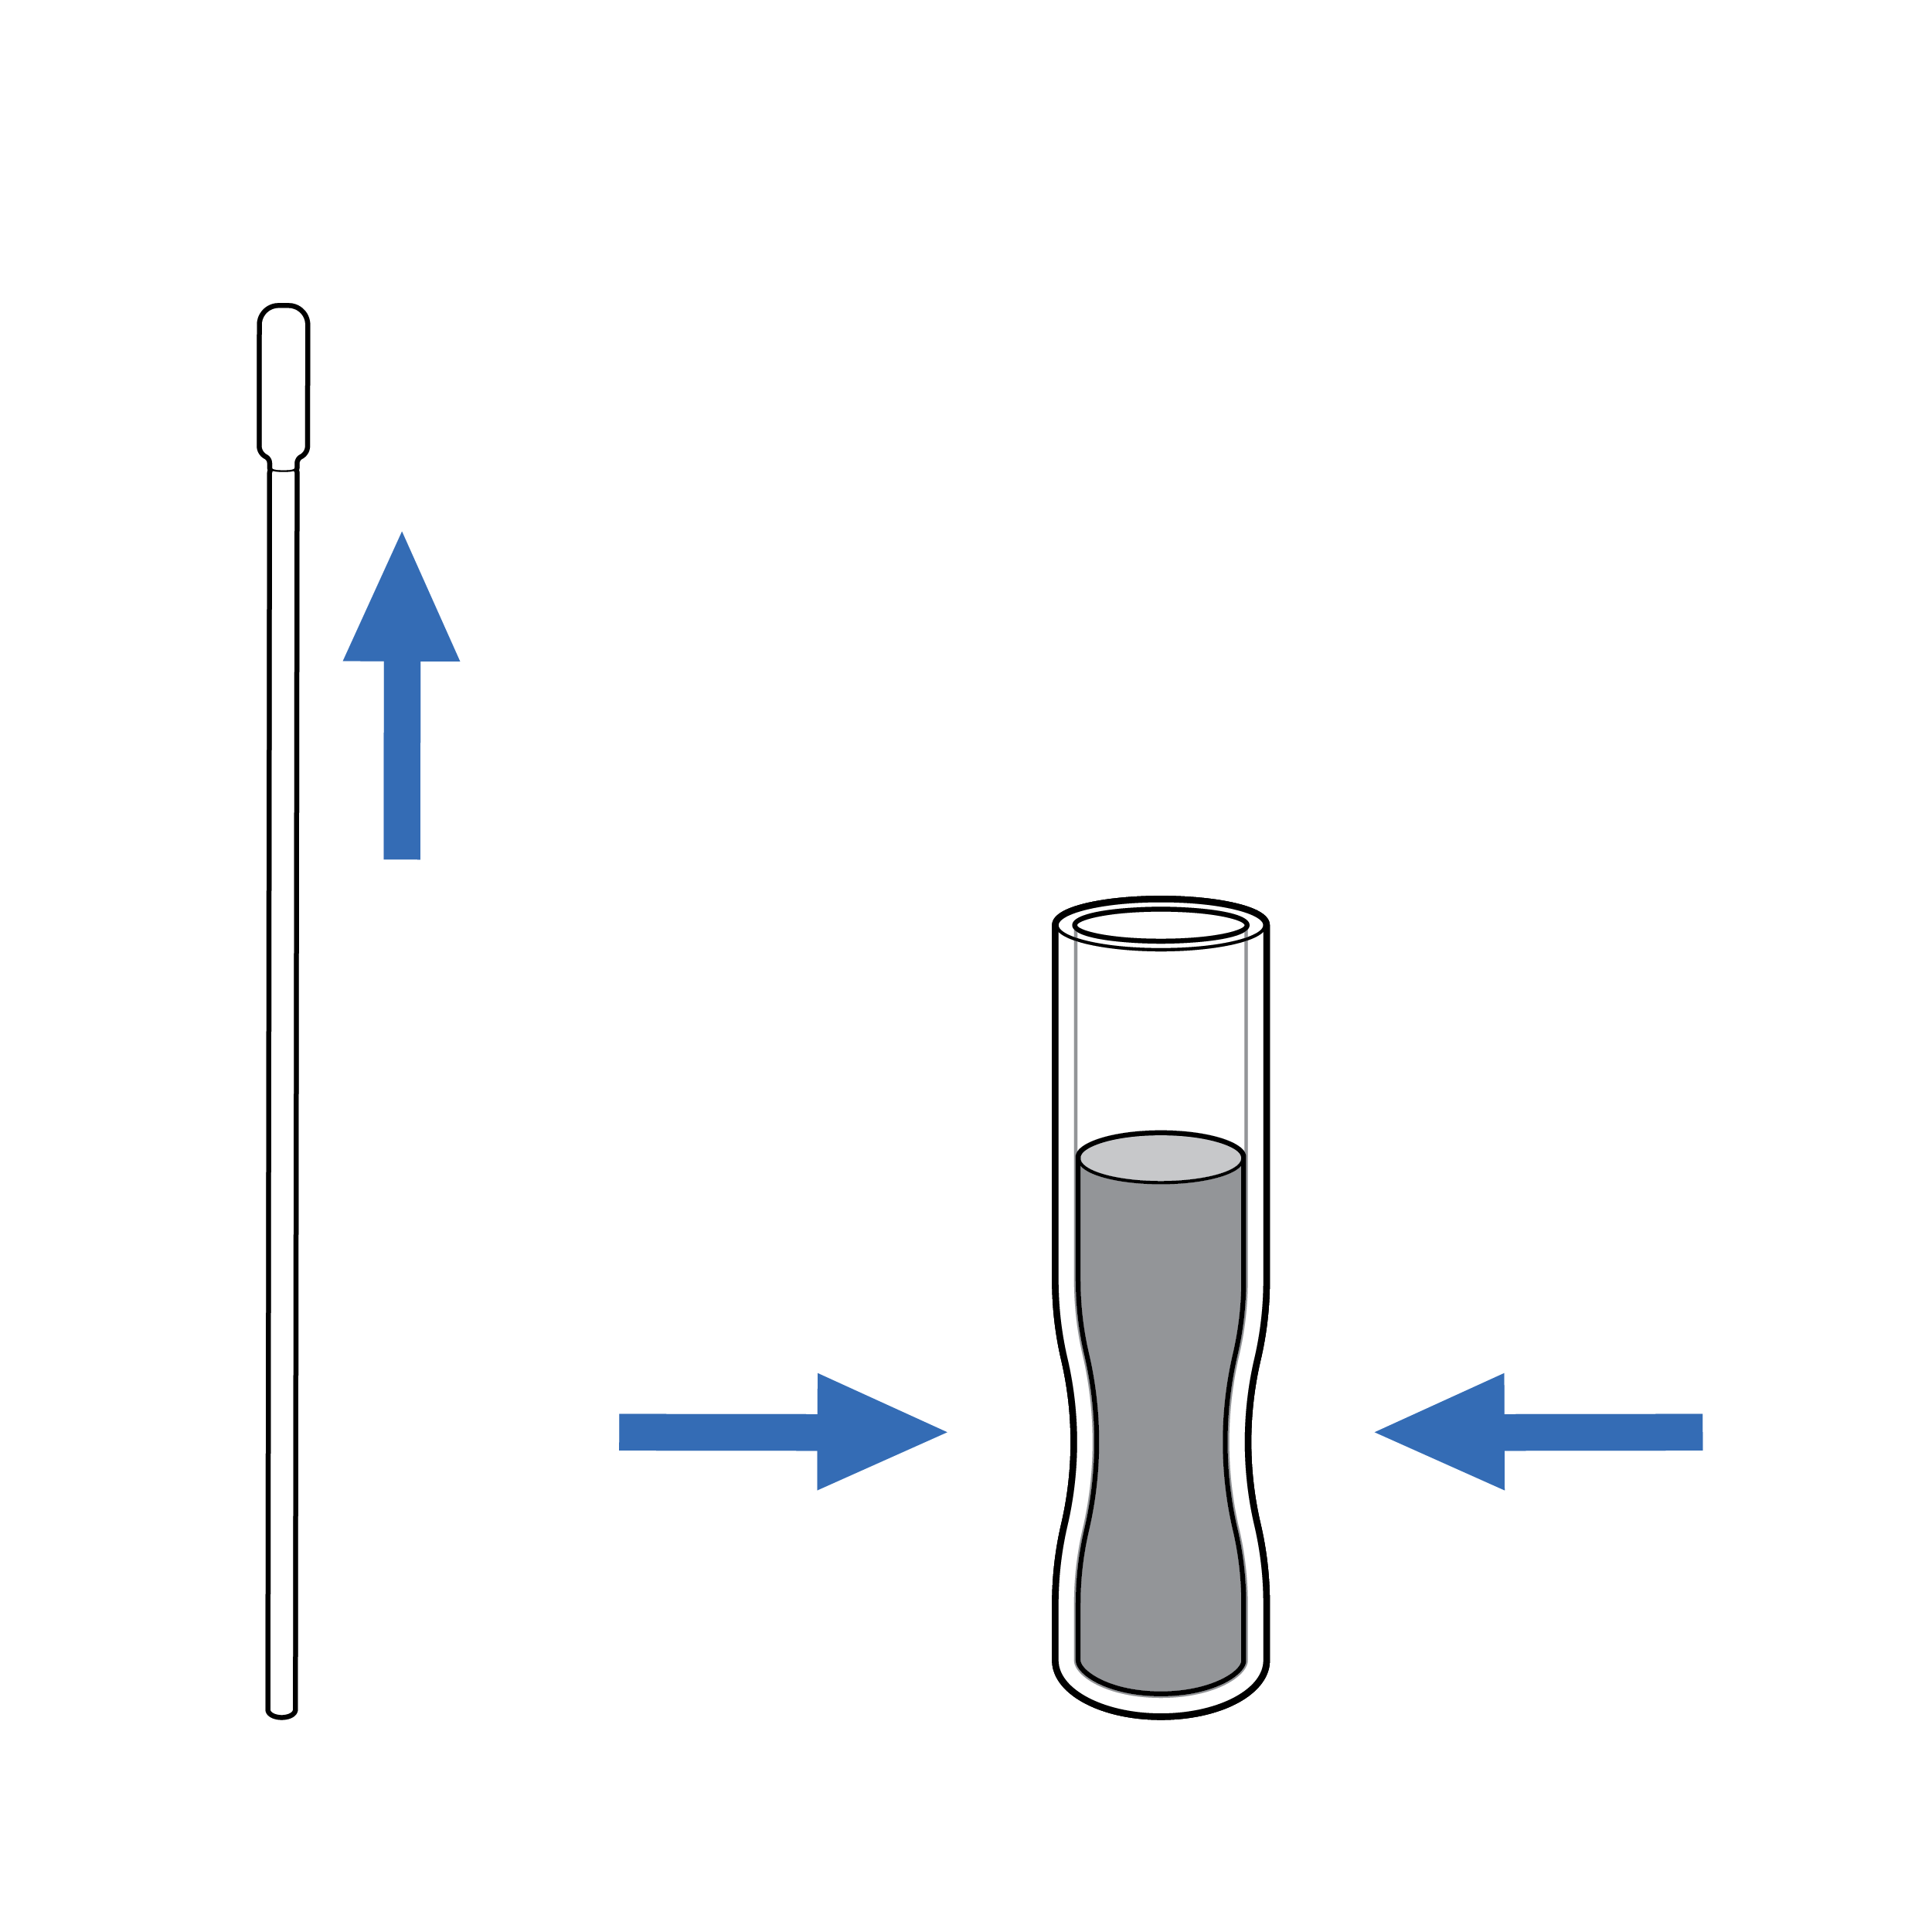 Line drawings of a swab and fluid vial with blue arrows.